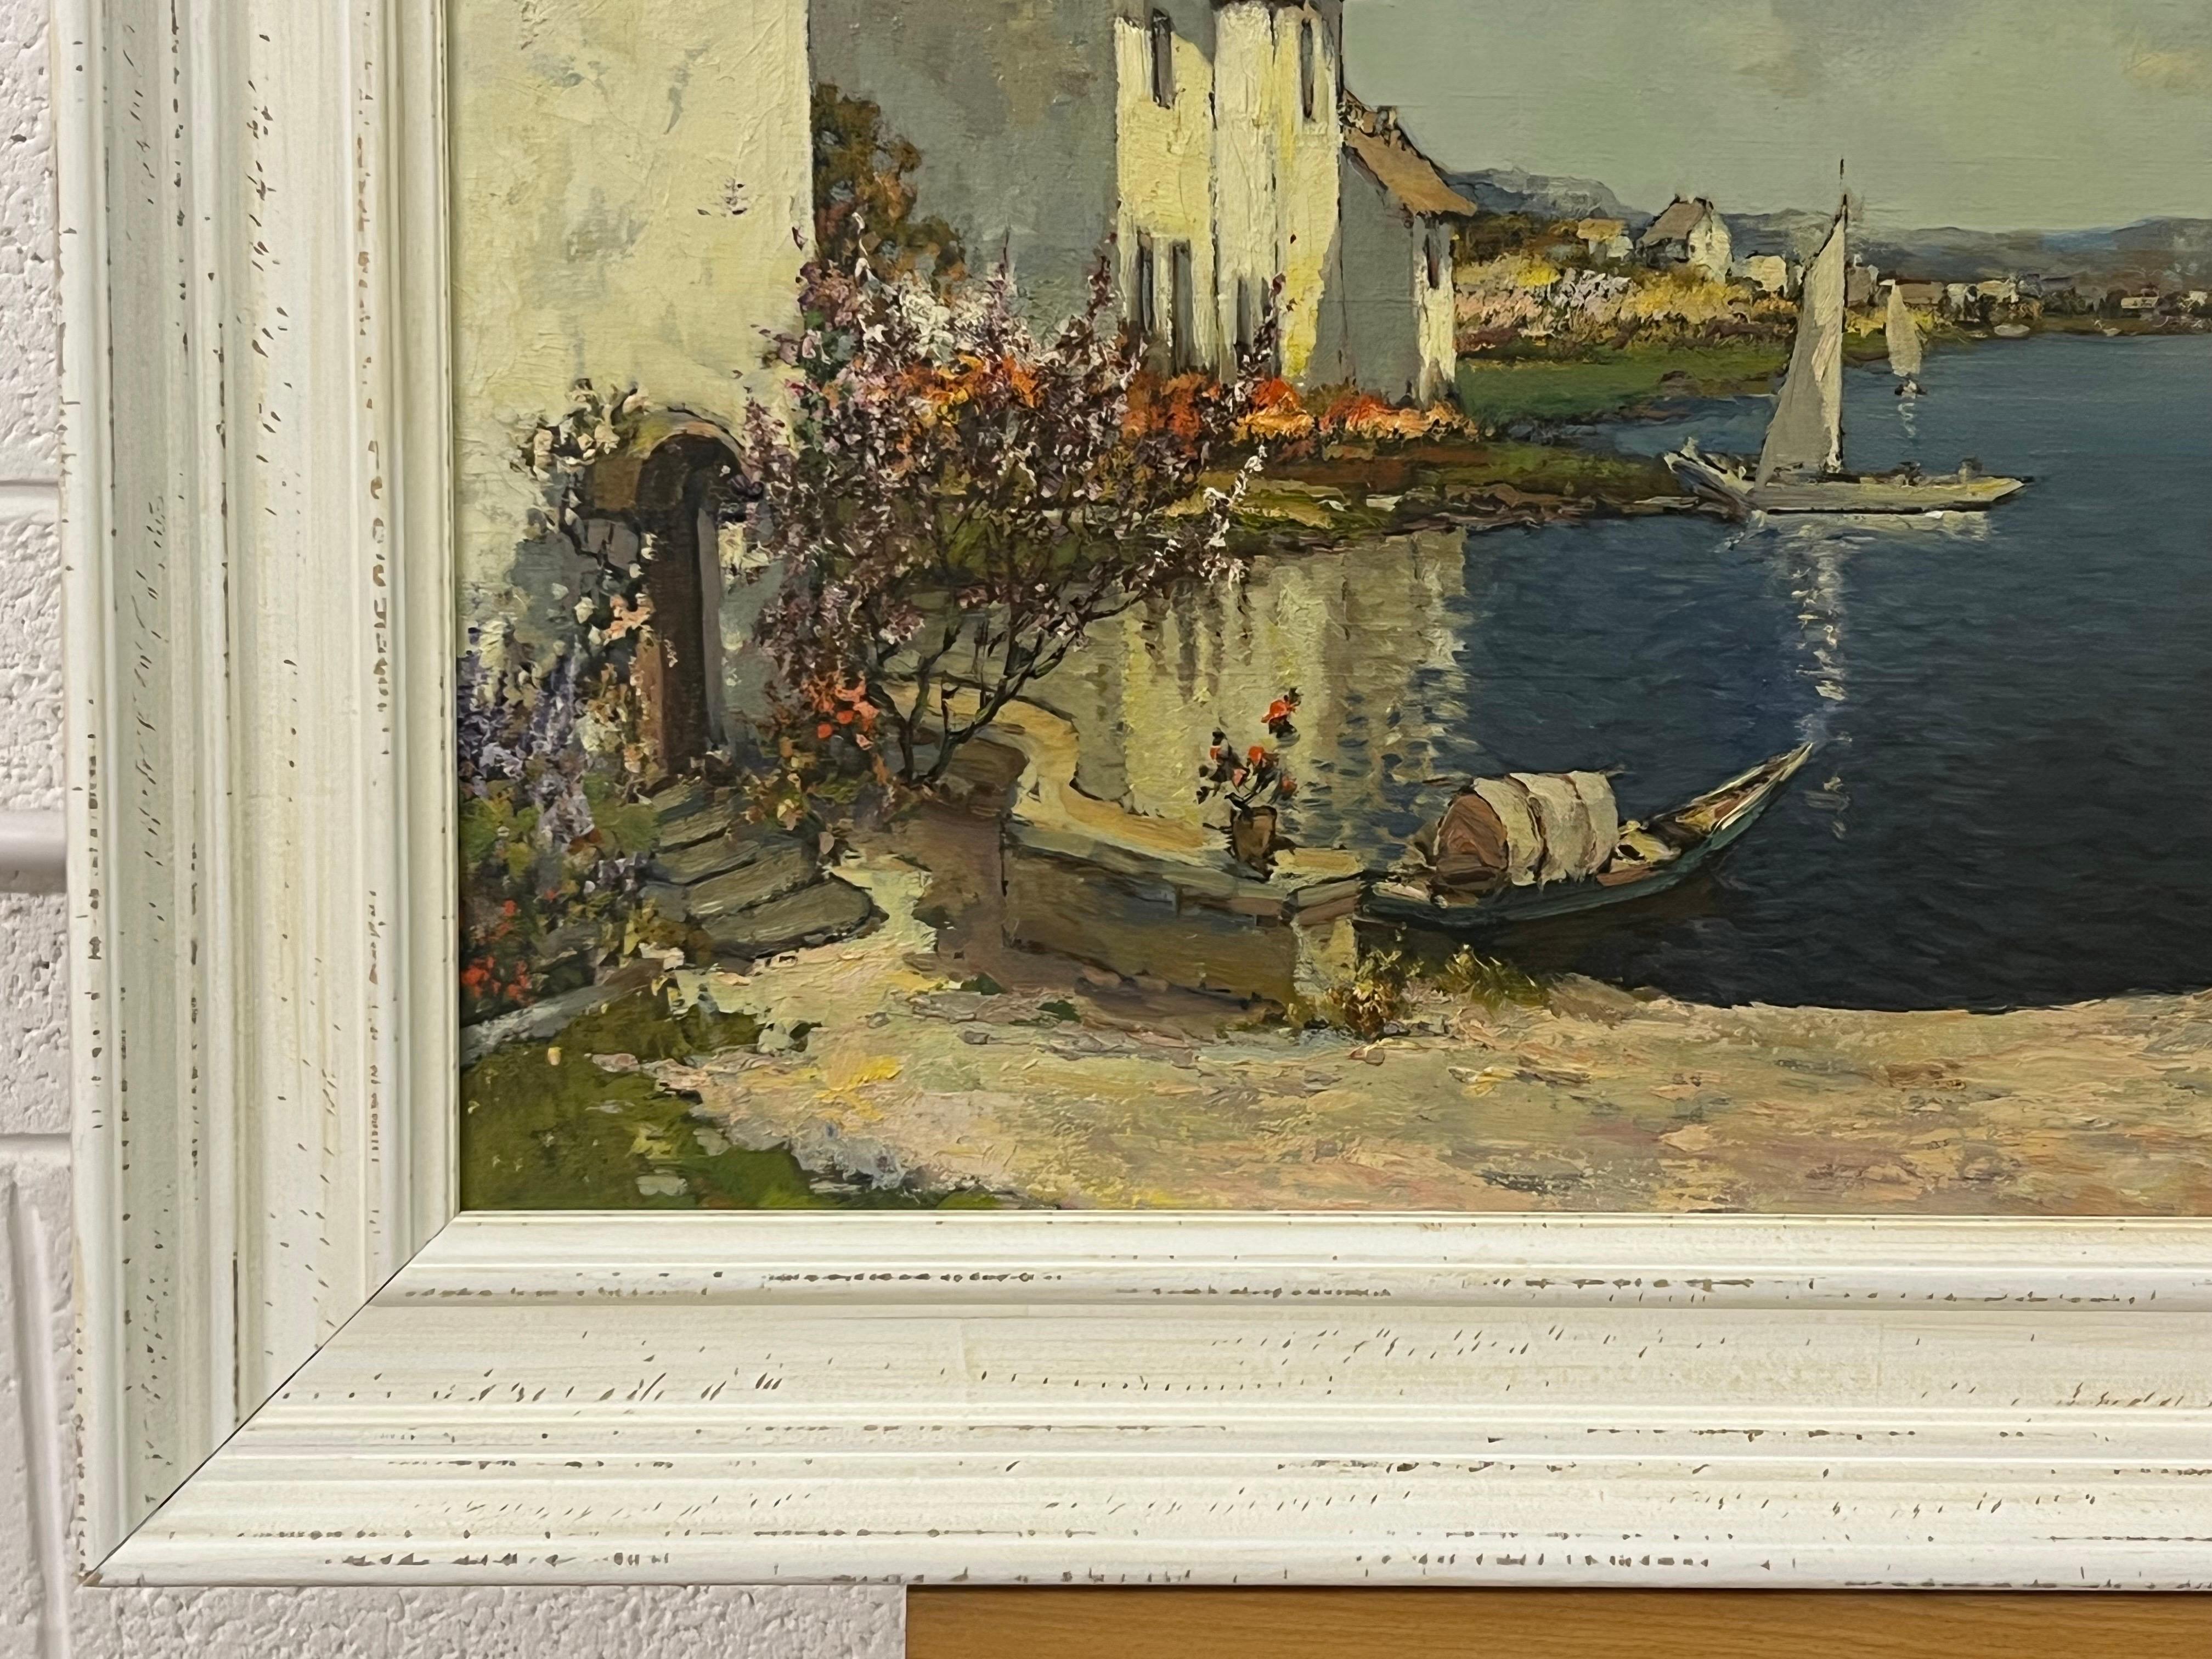 Mediterranean Painting of Lake Como in Italy by 20th Century American Artist, J W Wagner 

Art measures 28 x 20 inches 
Frame measures 33 x 25 inches 

Professionally cleaned and re-framed in a high quality shabby chic off-white moulding 
Early 20th